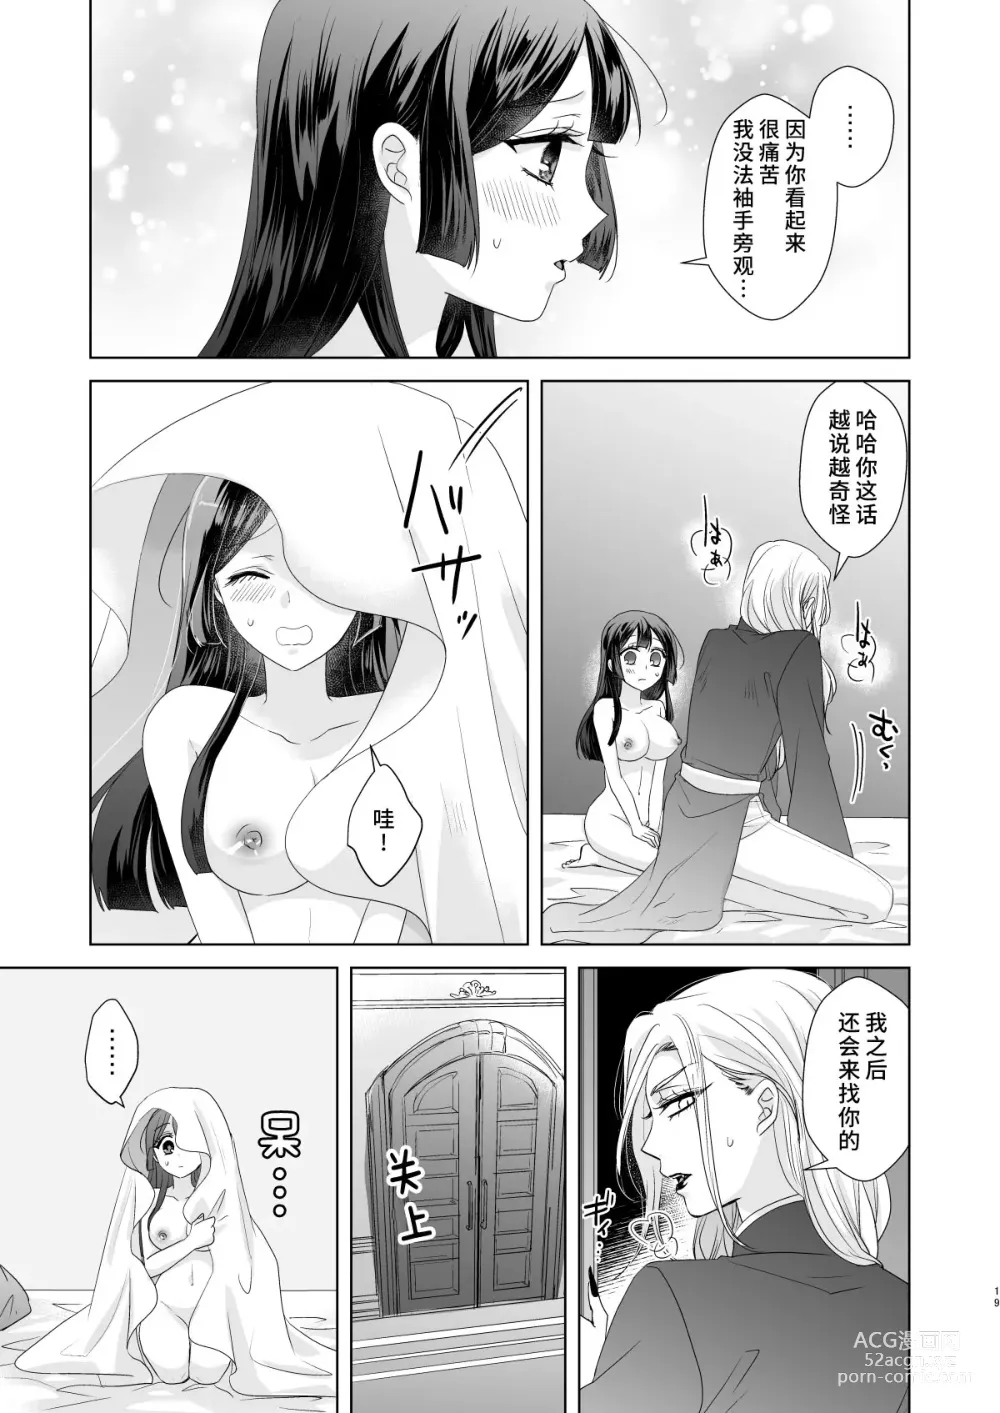 Page 18 of doujinshi 男大姐♂吸血鬼和少女